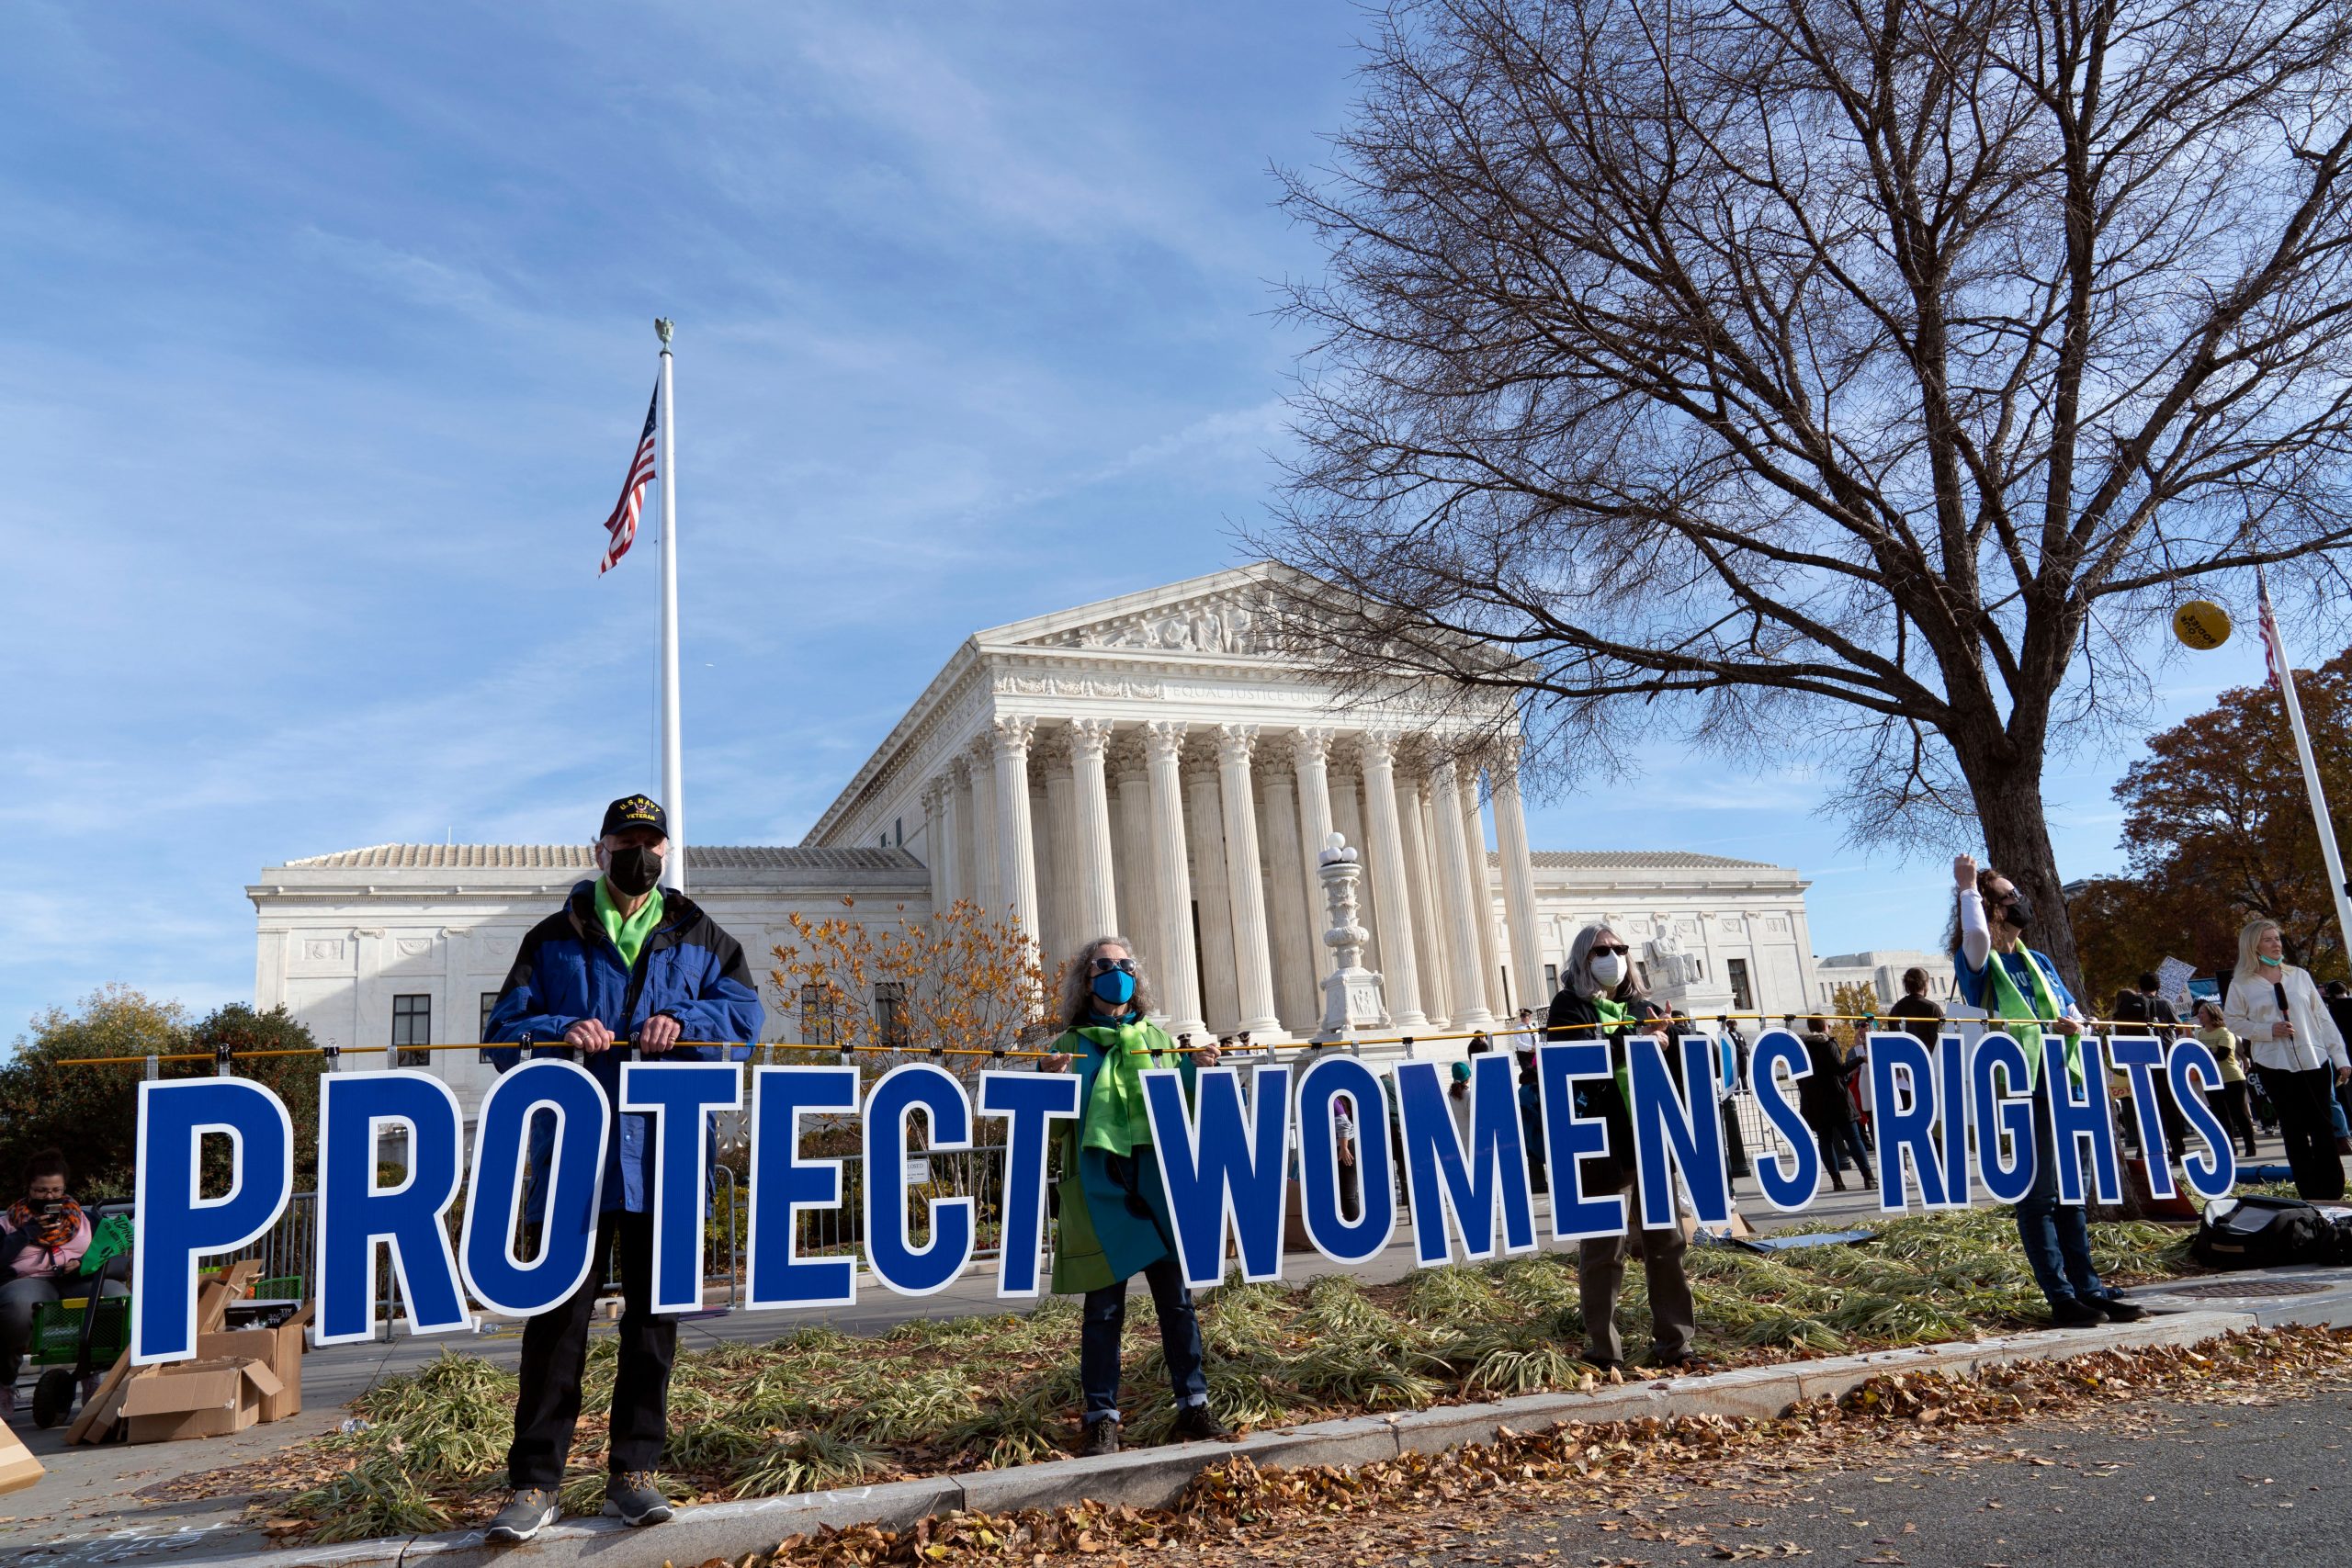 Few Americans want Roe overturned, but abortion opinions vary widely